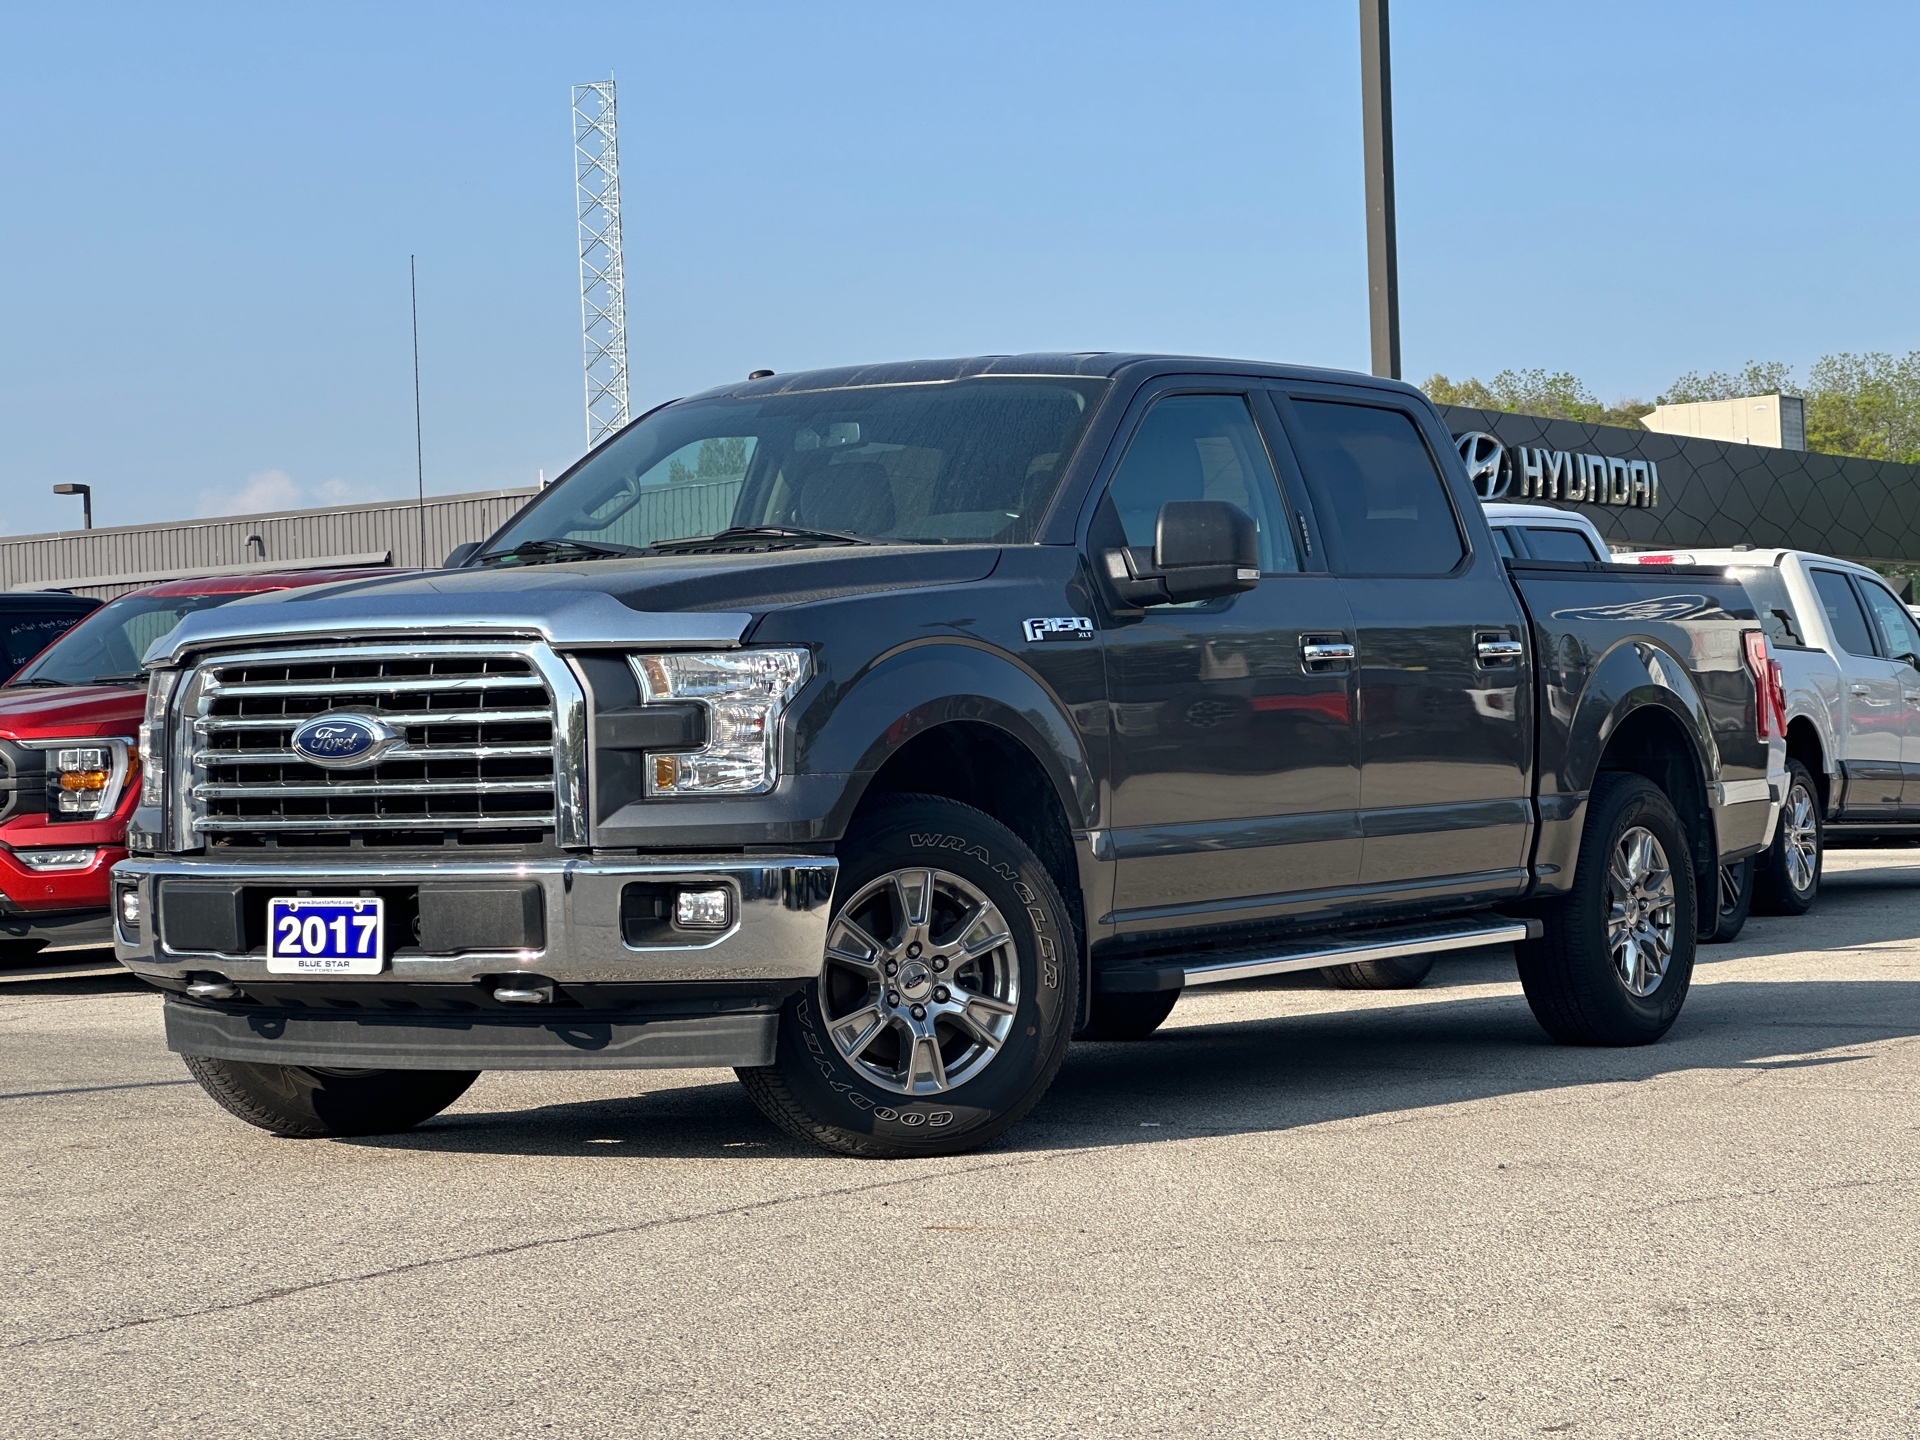 2017 Ford F-150 XLT - XTR Package, 3.5L Naturally Aspirated Engine